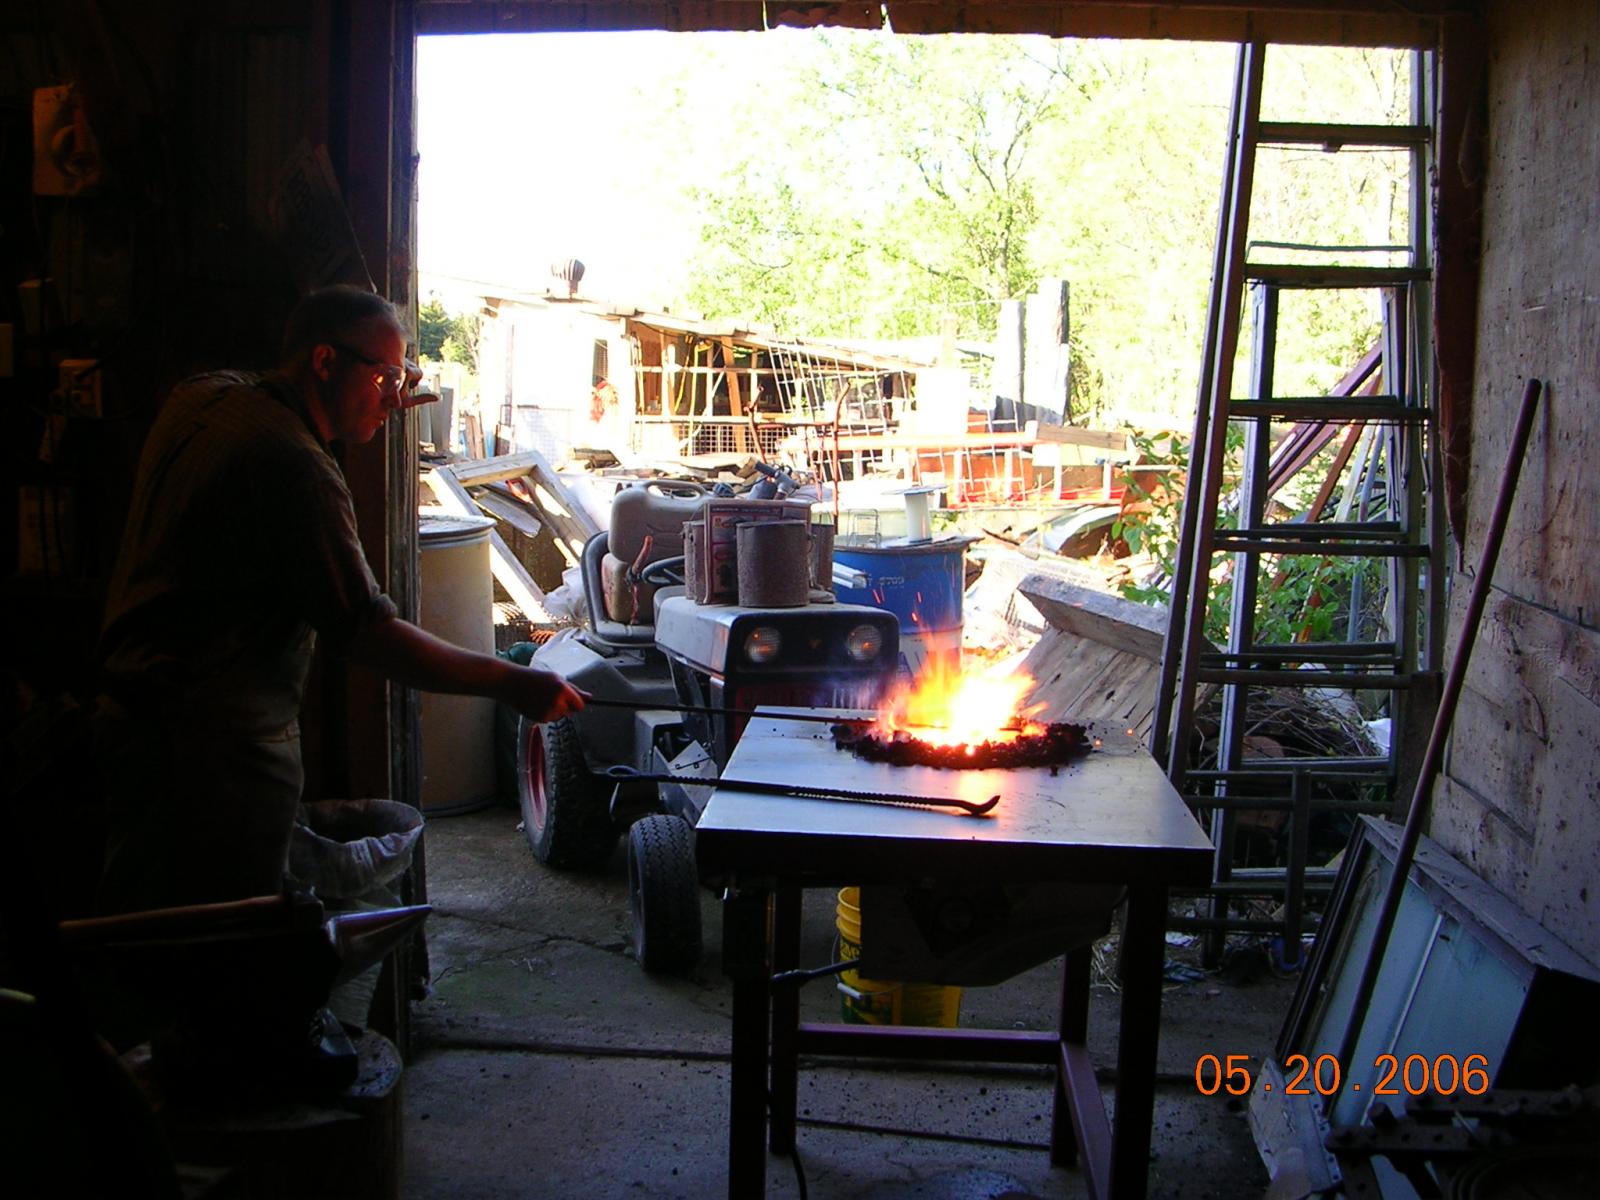 First_firing_of_forge_050